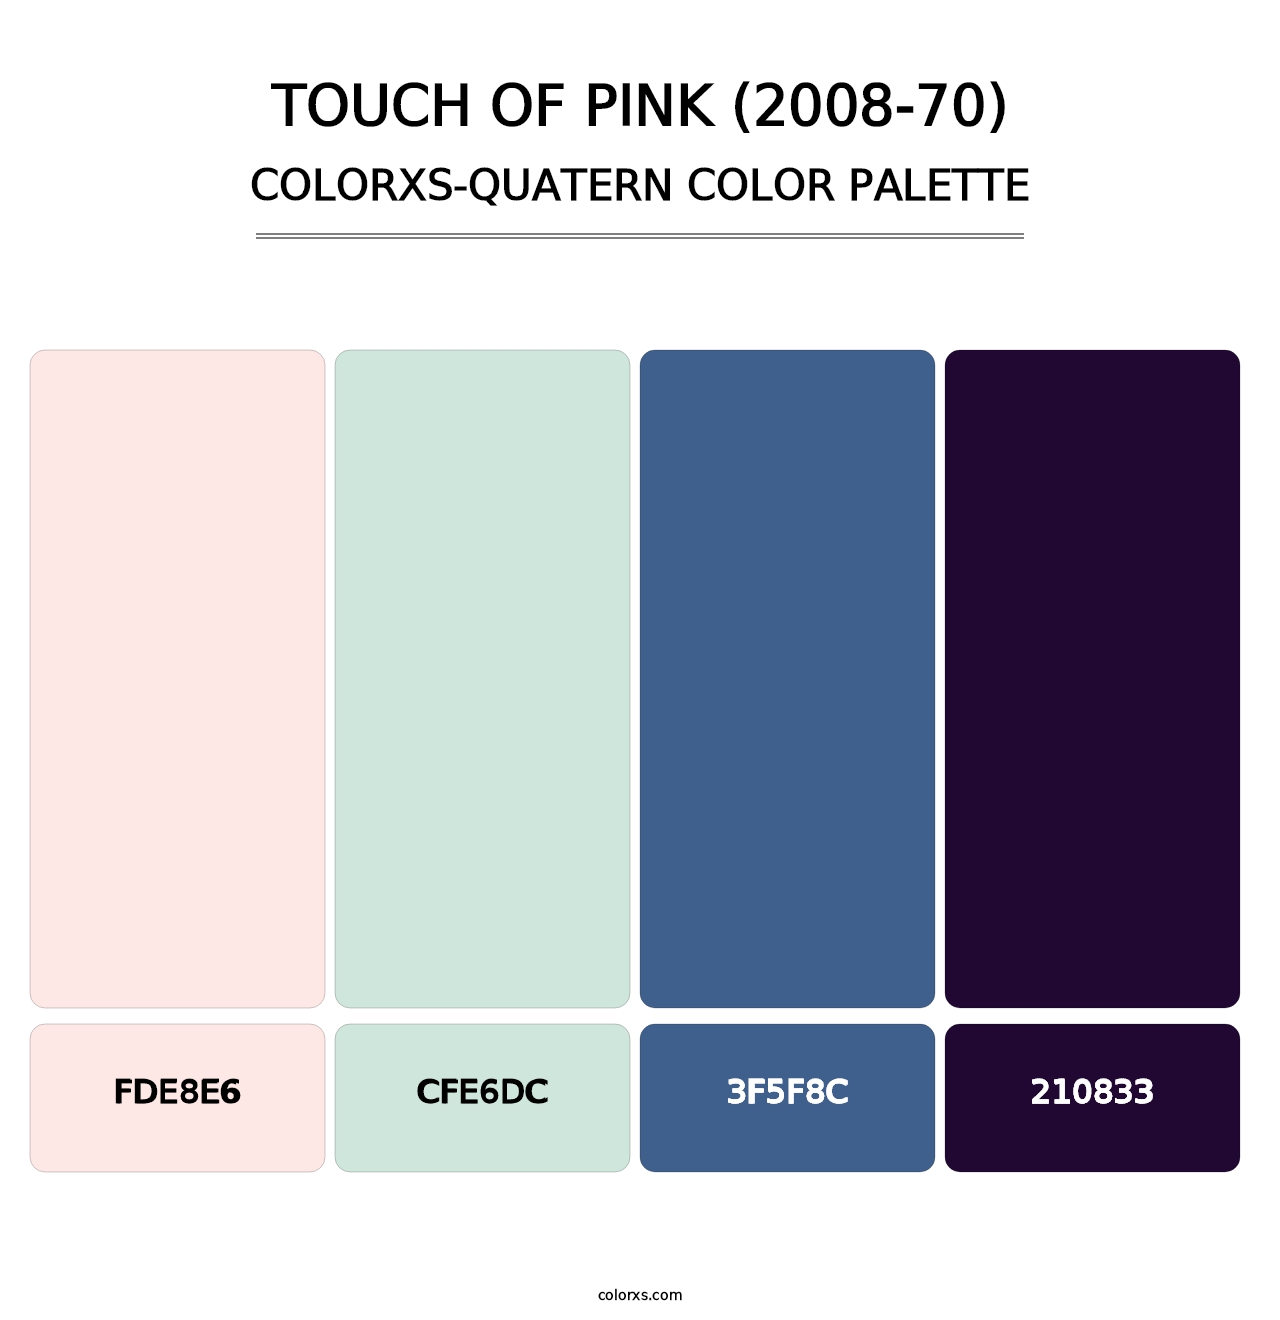 Touch of Pink (2008-70) - Colorxs Quatern Palette